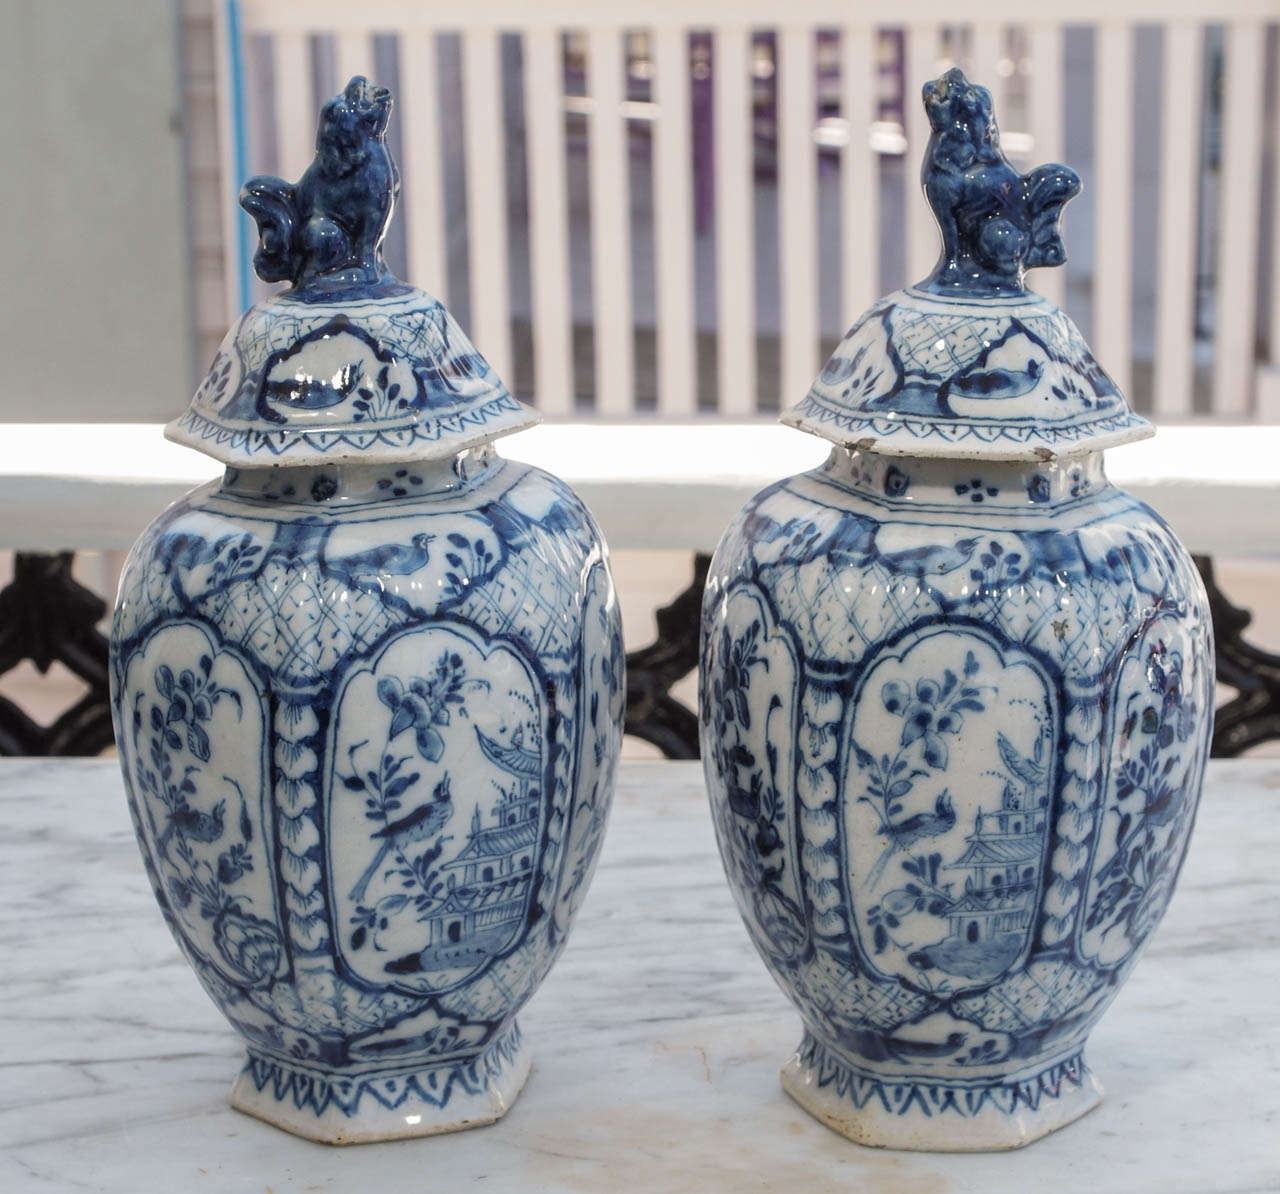 Pair of Ribbed melon Jars with lids Late 18th c. early 19th c. Delft